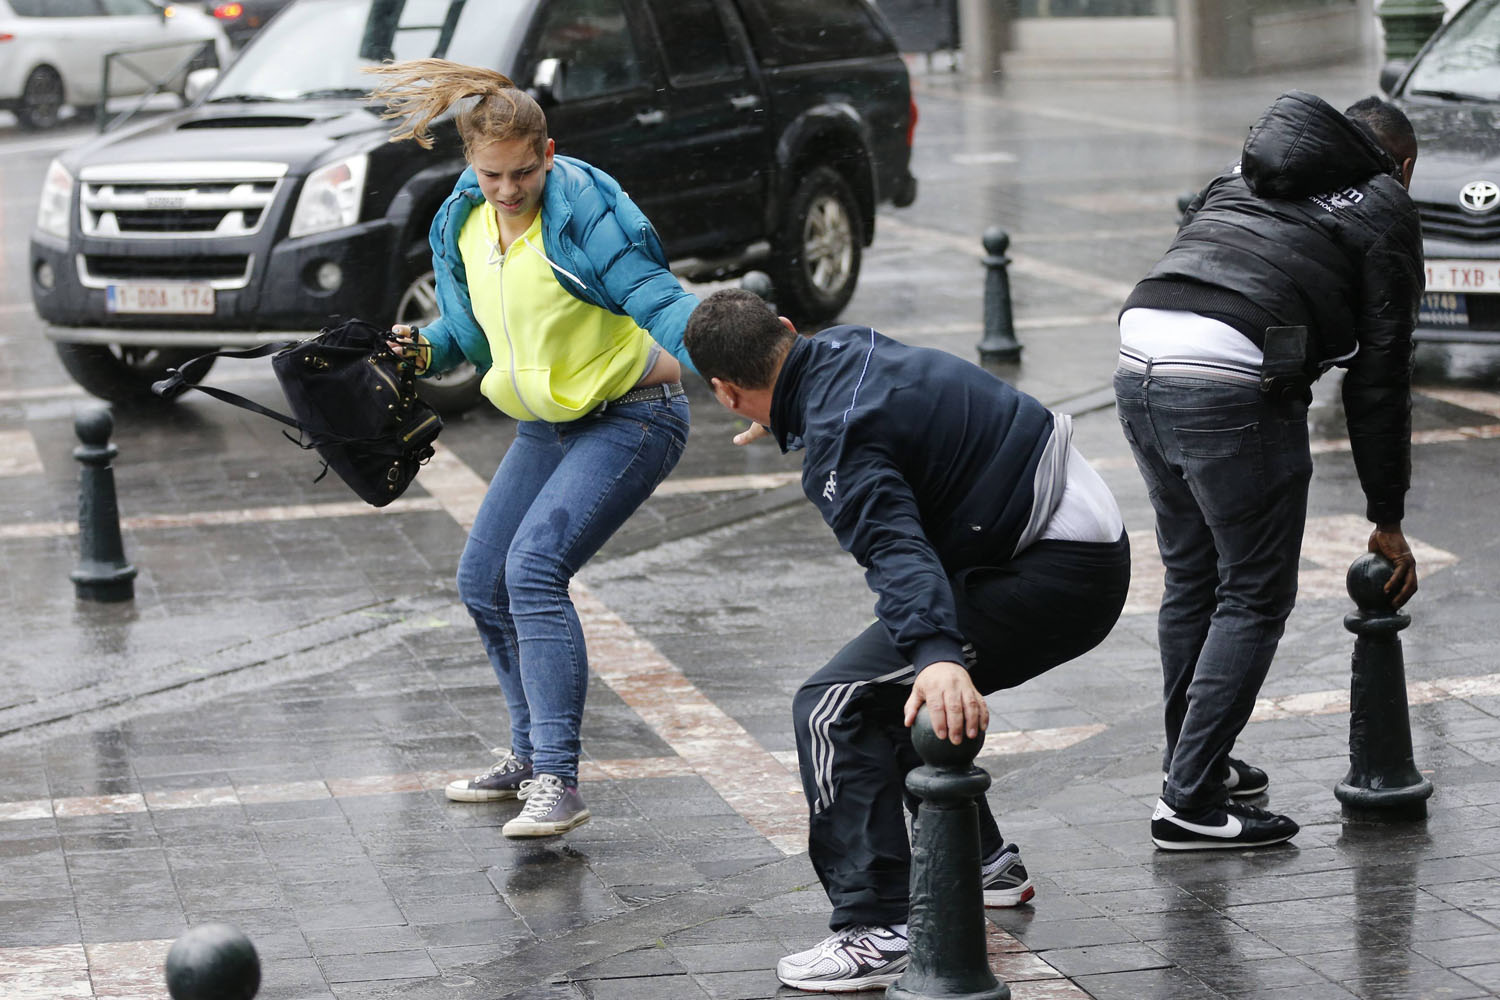 Oct. 28, 2013. A man helps a woman to cross a square during strong winds in central Brussels, Belguim.